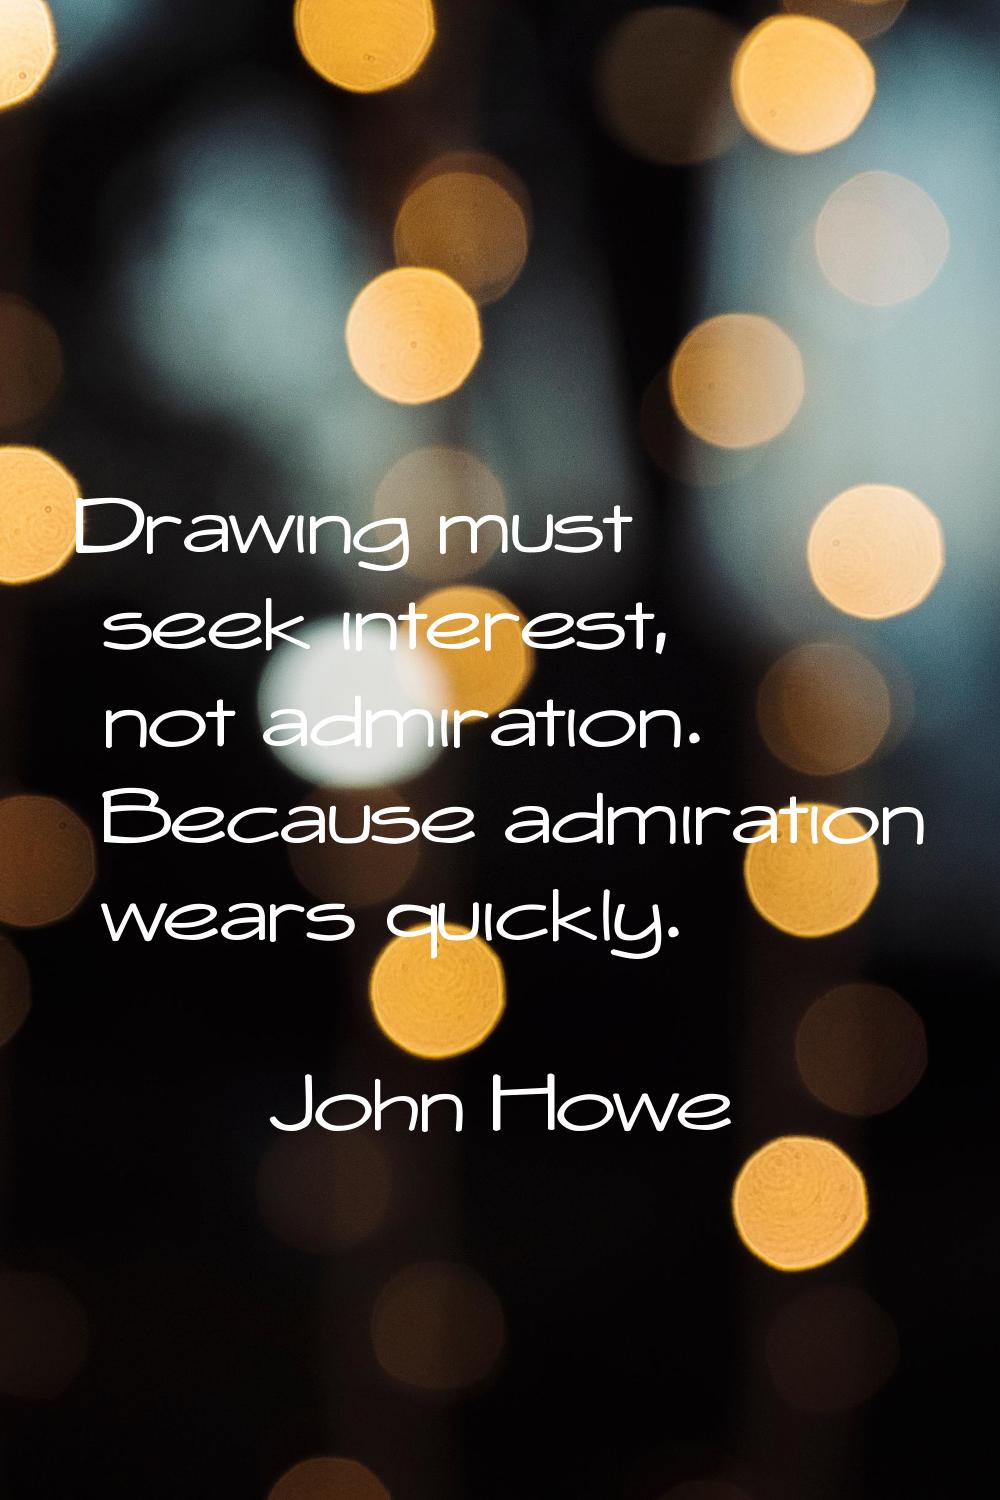 Drawing must seek interest, not admiration. Because admiration wears quickly.